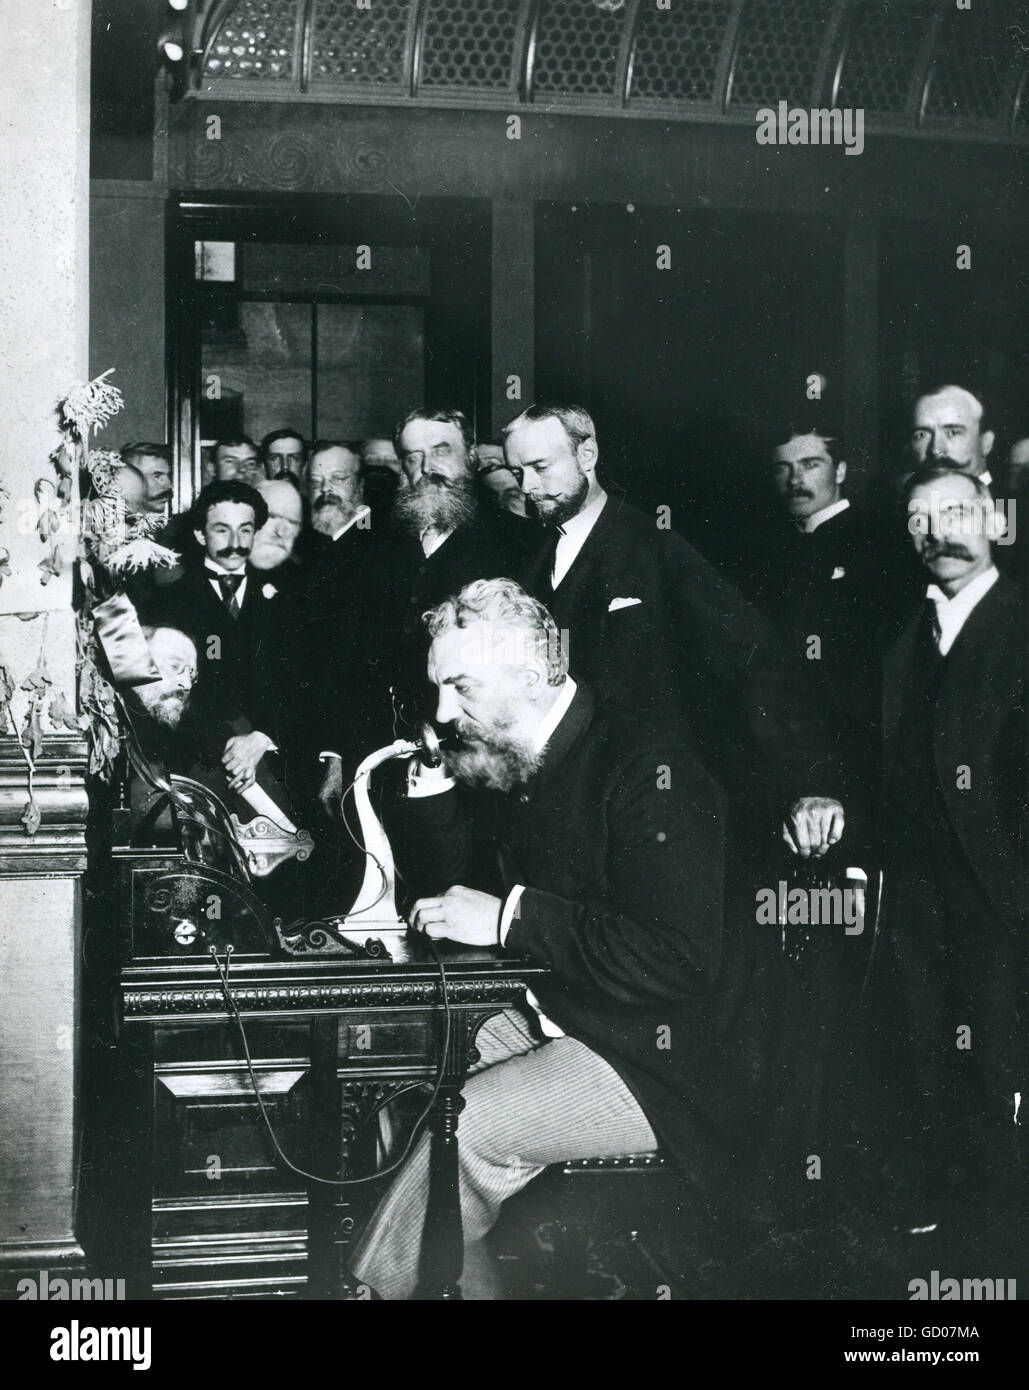 Photo of Alexander Graham Bell, inventor of the telephone,  talking into an early-style telephone at the opening of the New York-Chicago line. Stock Photo